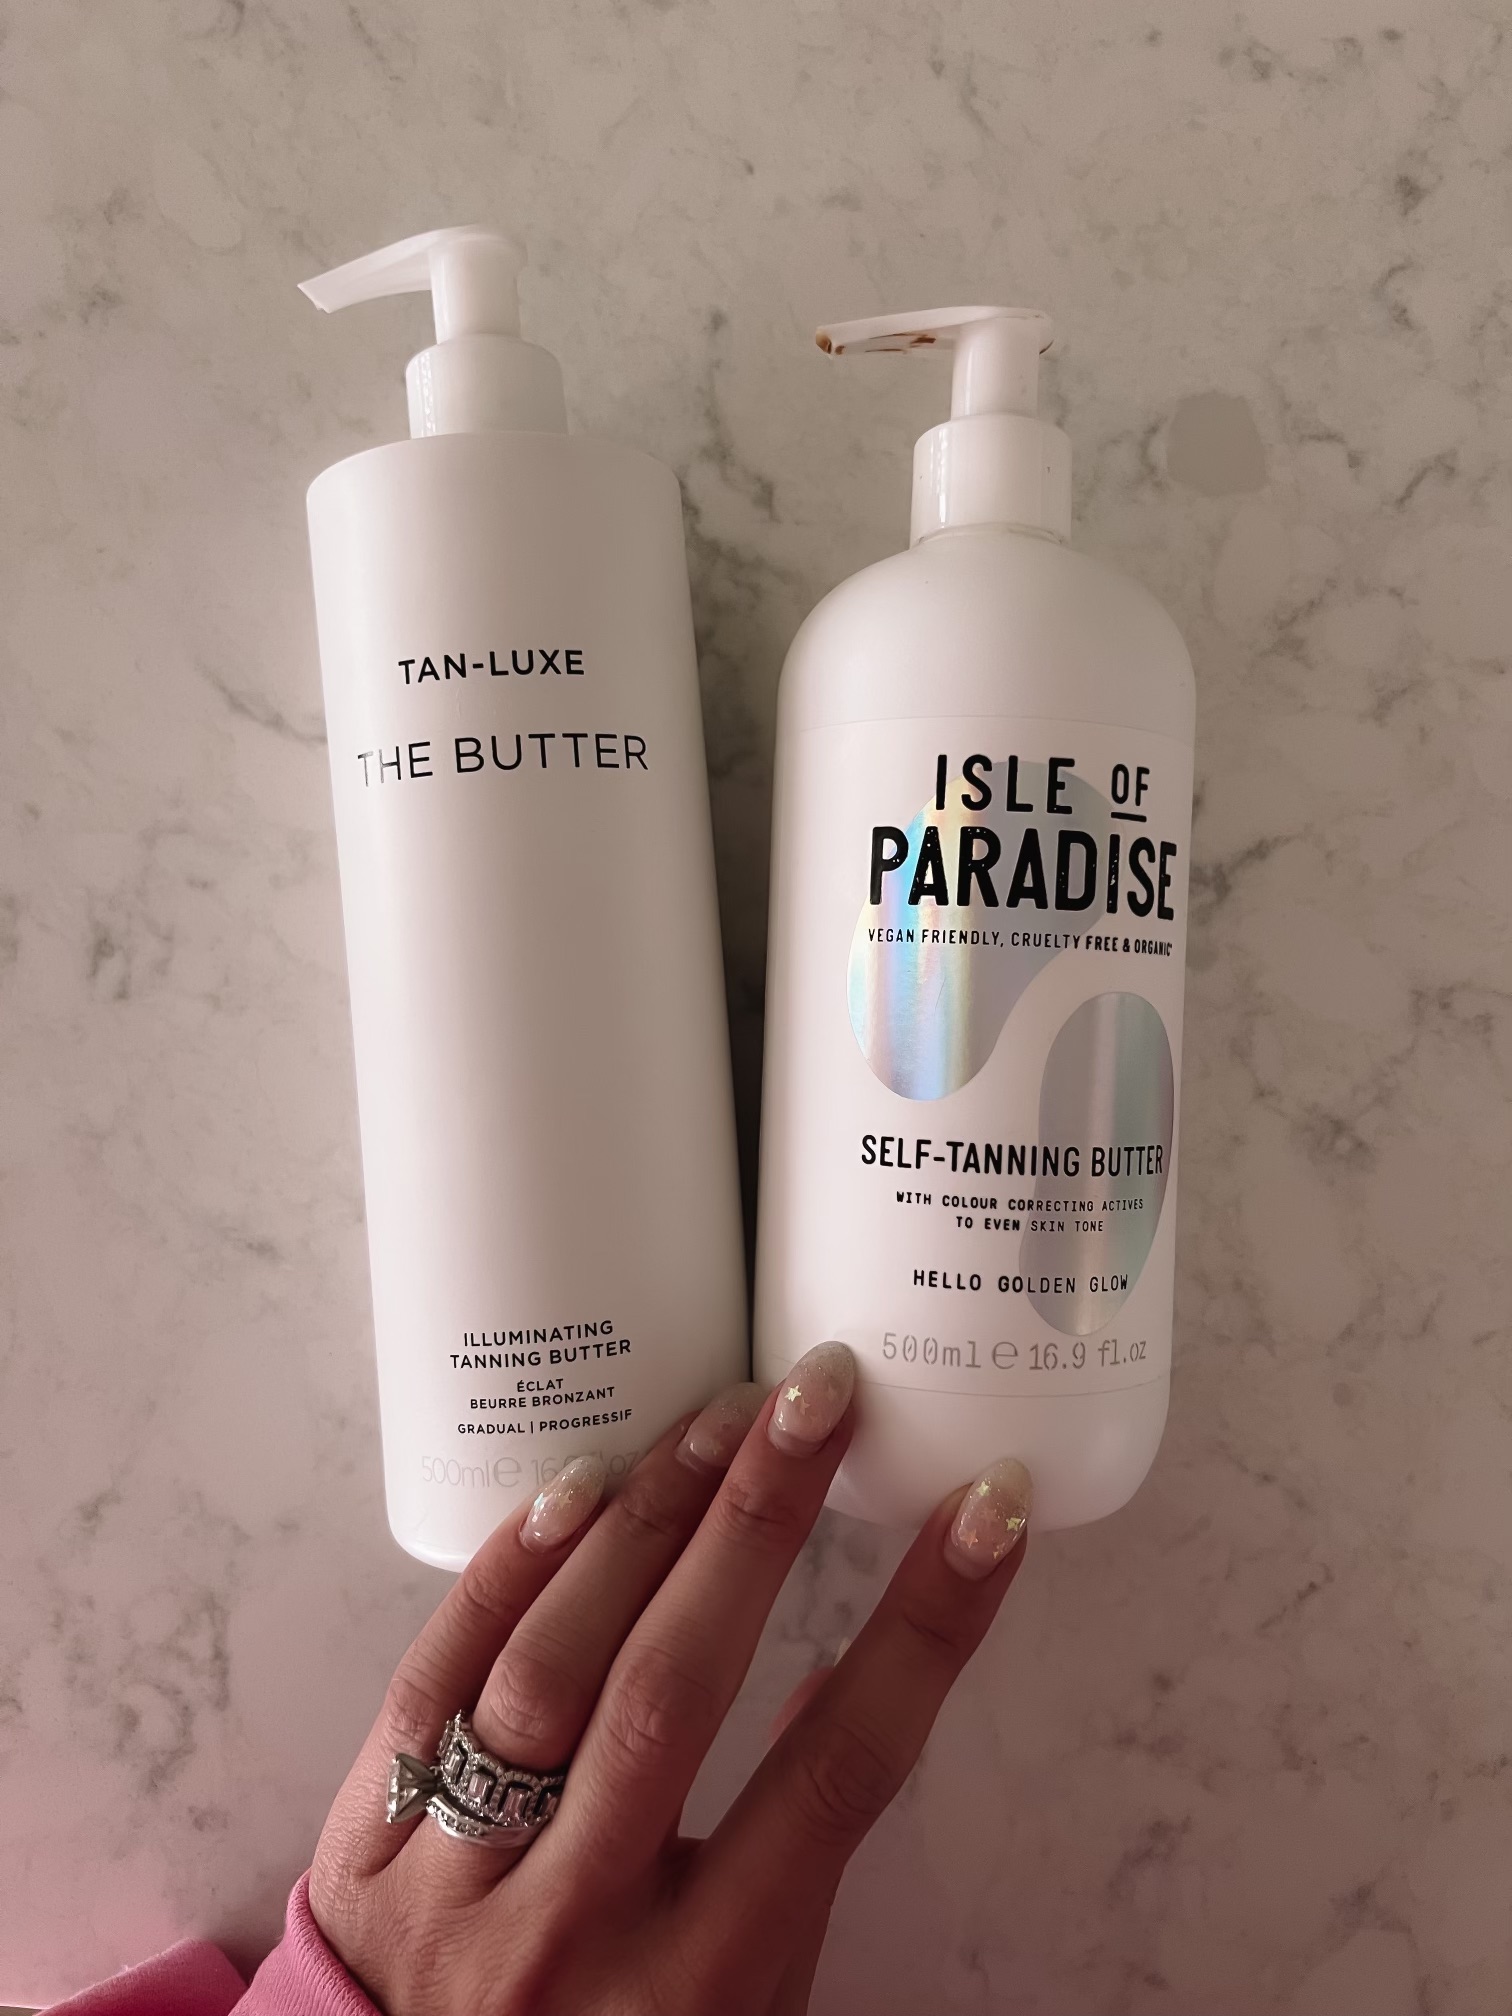 tan luxe butter and isle of paradise